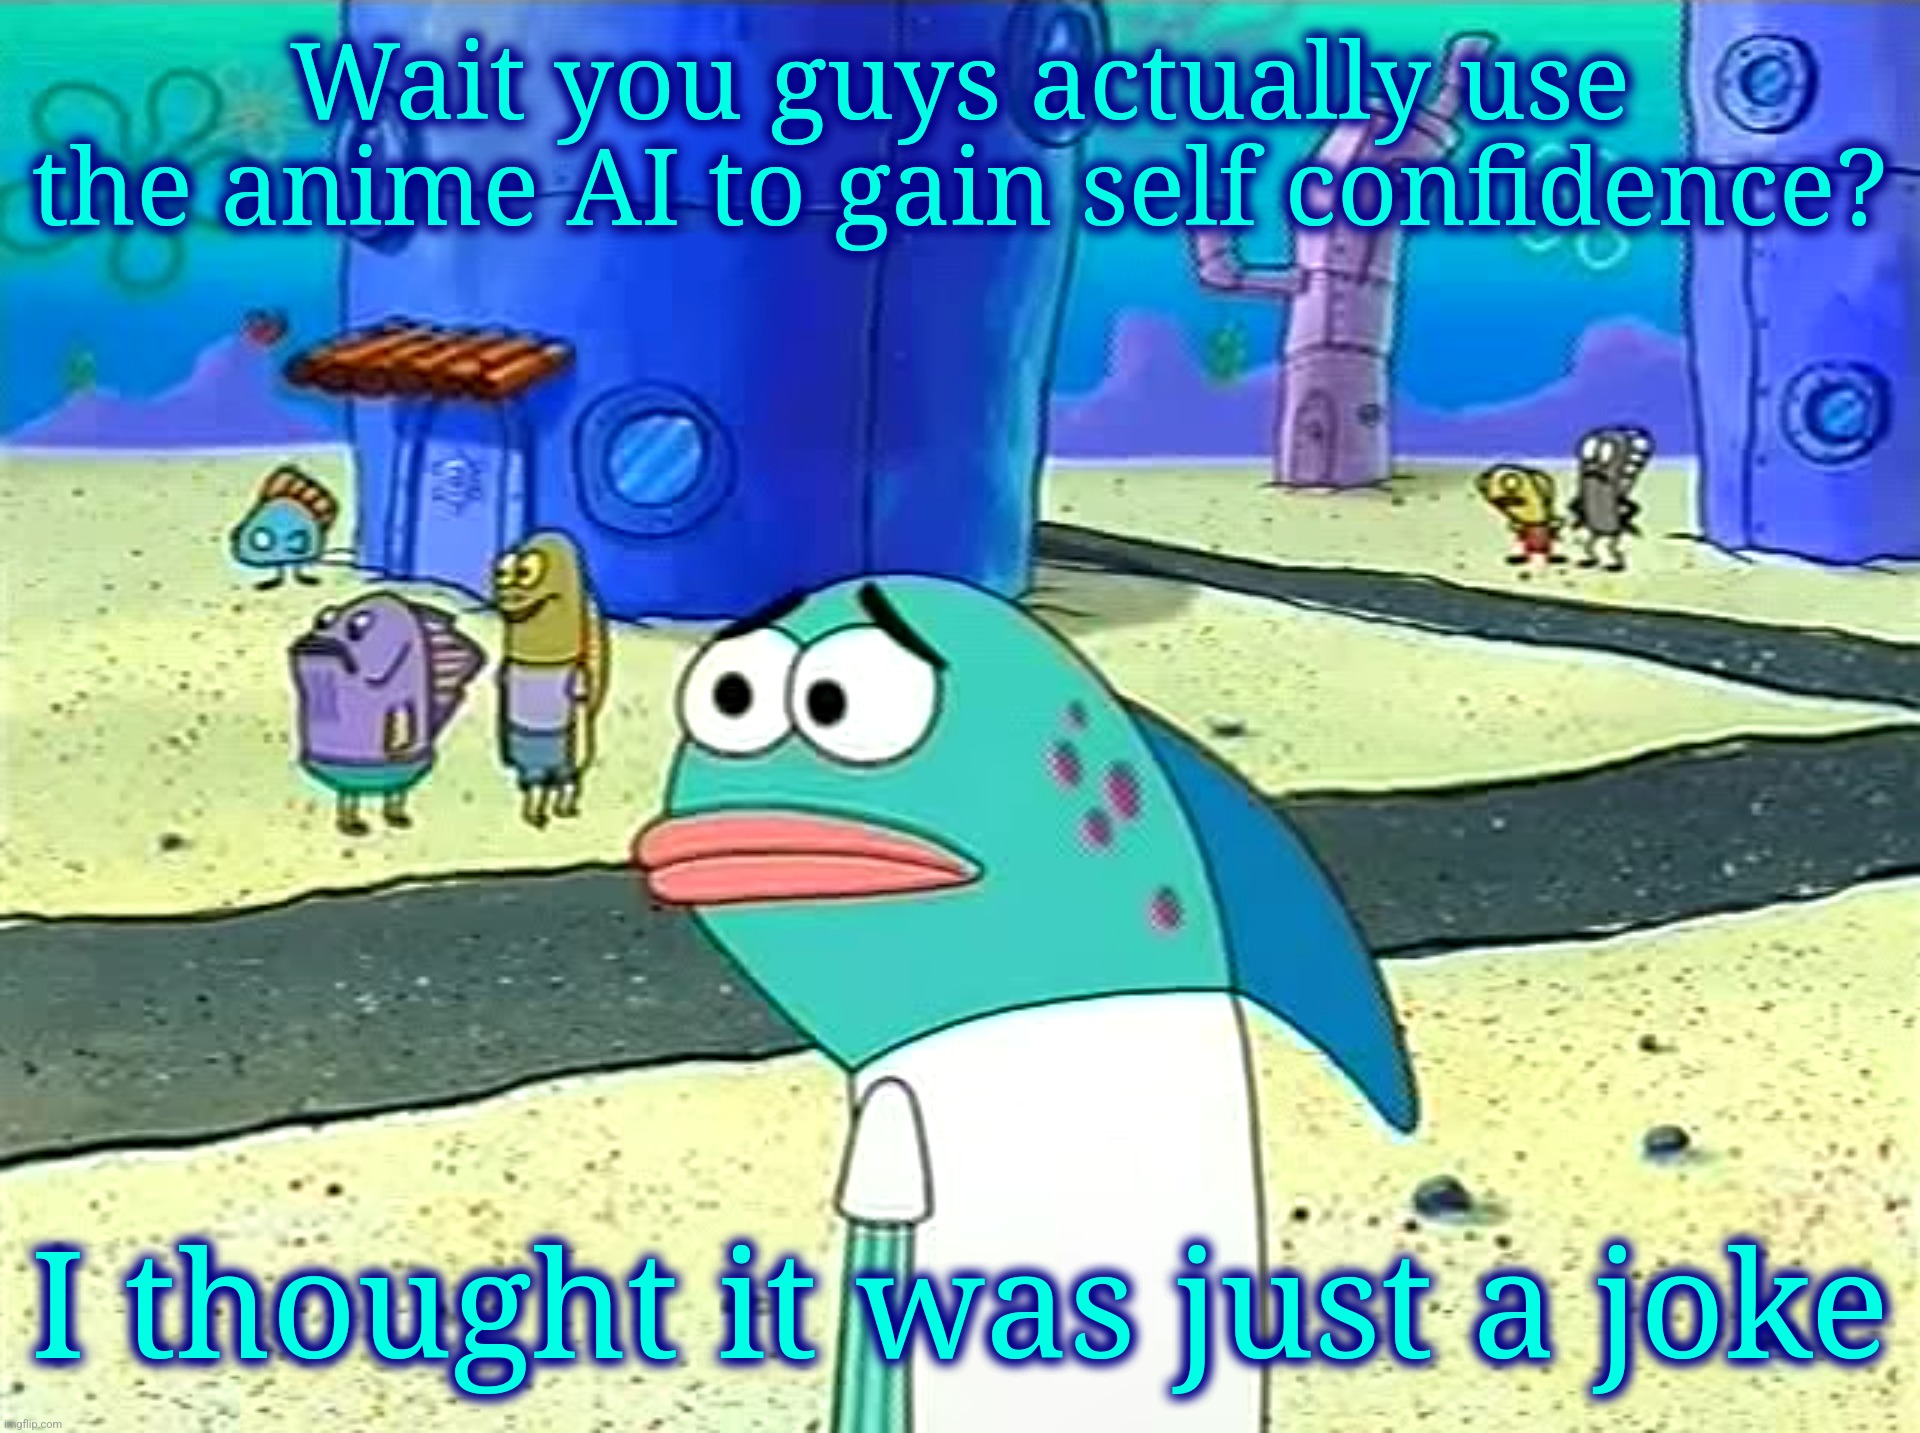 Spongebob I thought it was a joke | Wait you guys actually use the anime AI to gain self confidence? I thought it was just a joke | image tagged in spongebob i thought it was a joke | made w/ Imgflip meme maker